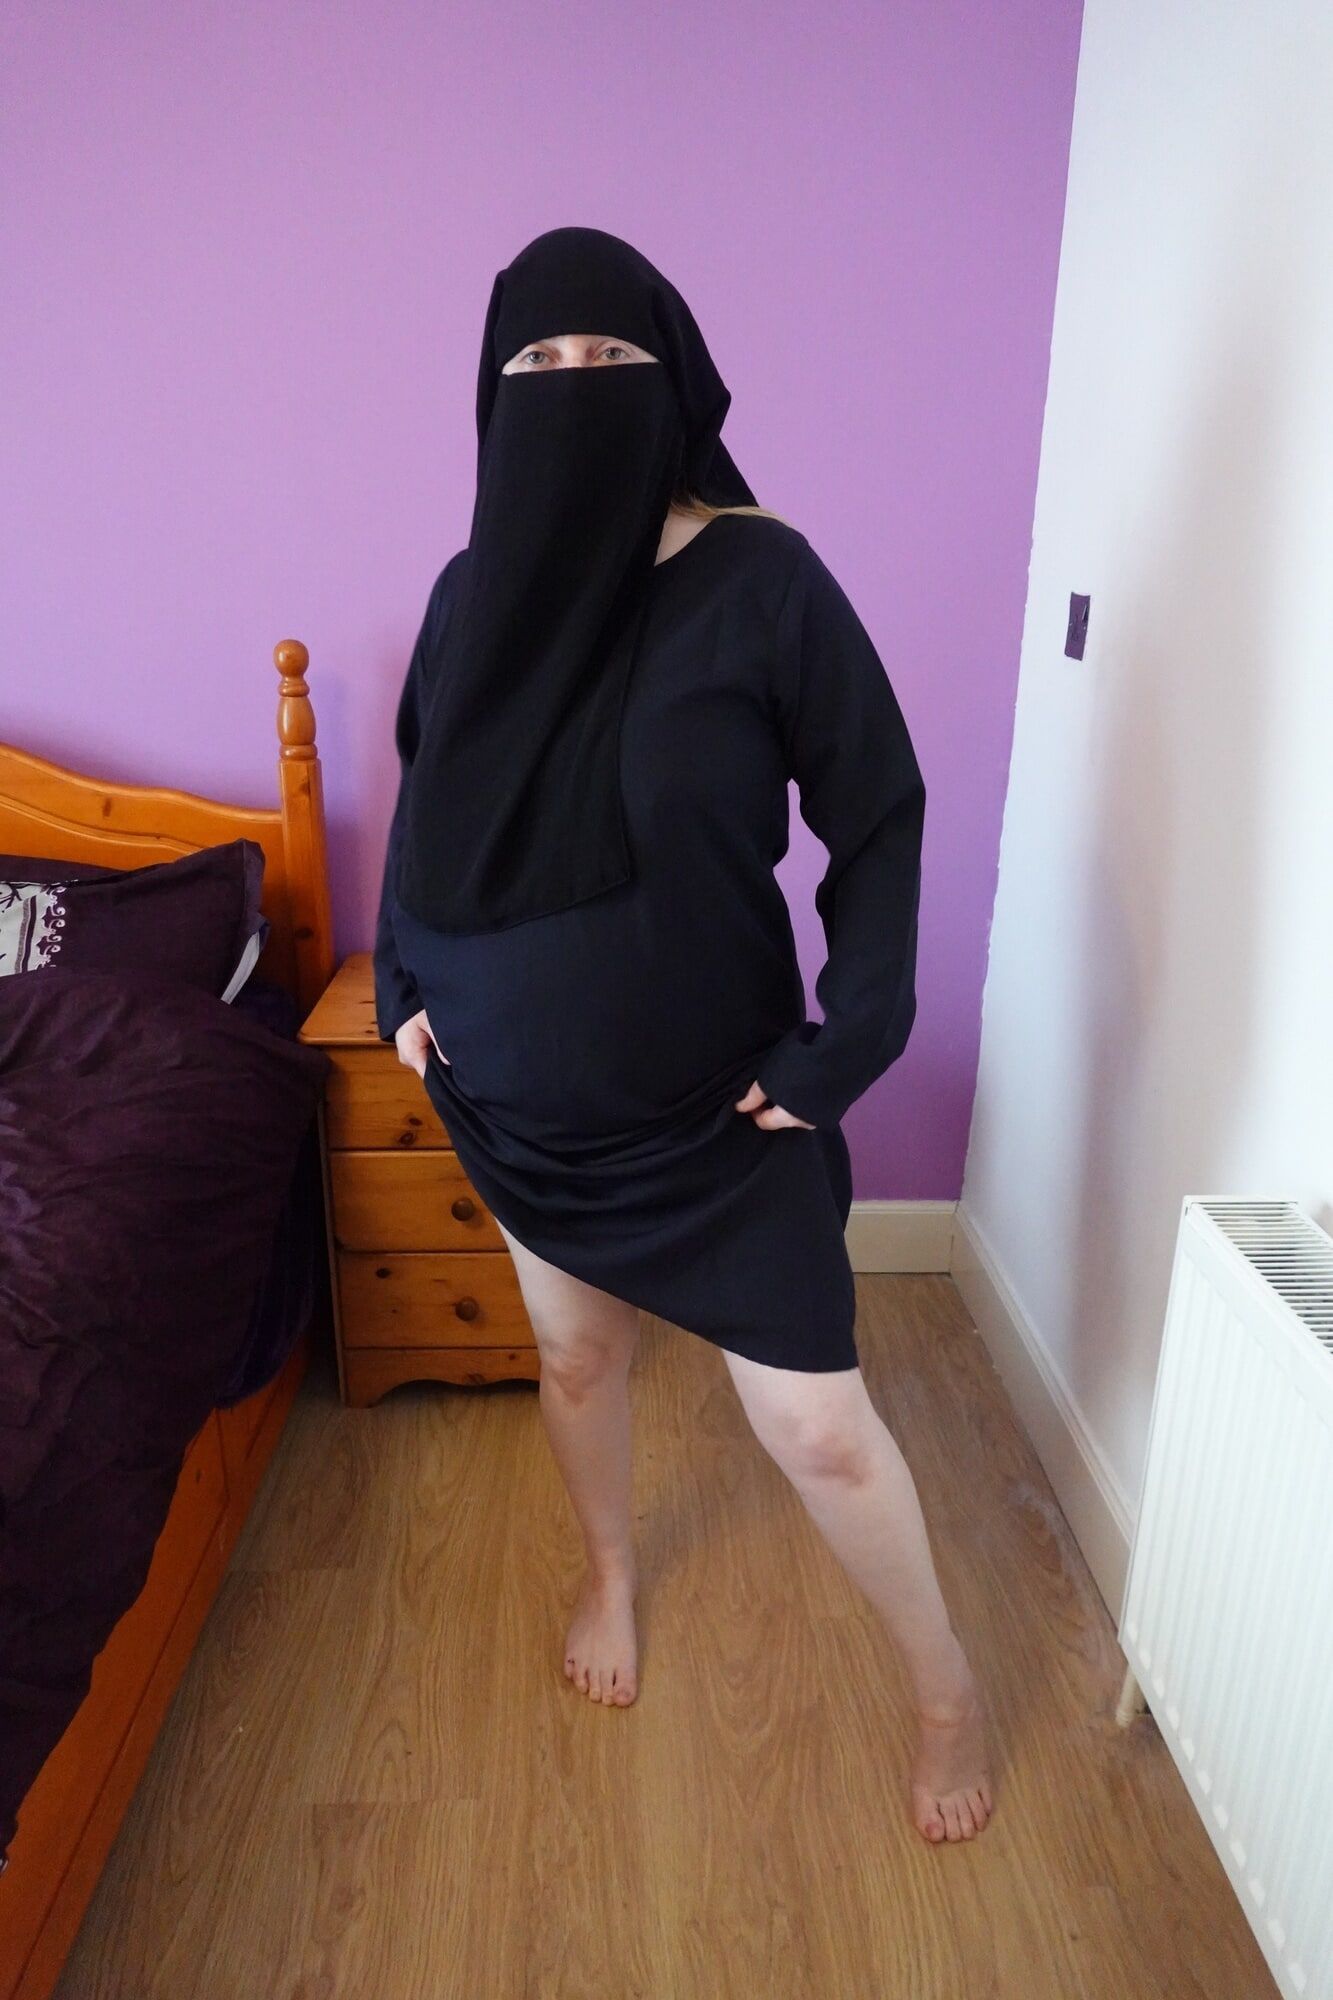 wife wearing Burqa with Niqab naked underneath #6